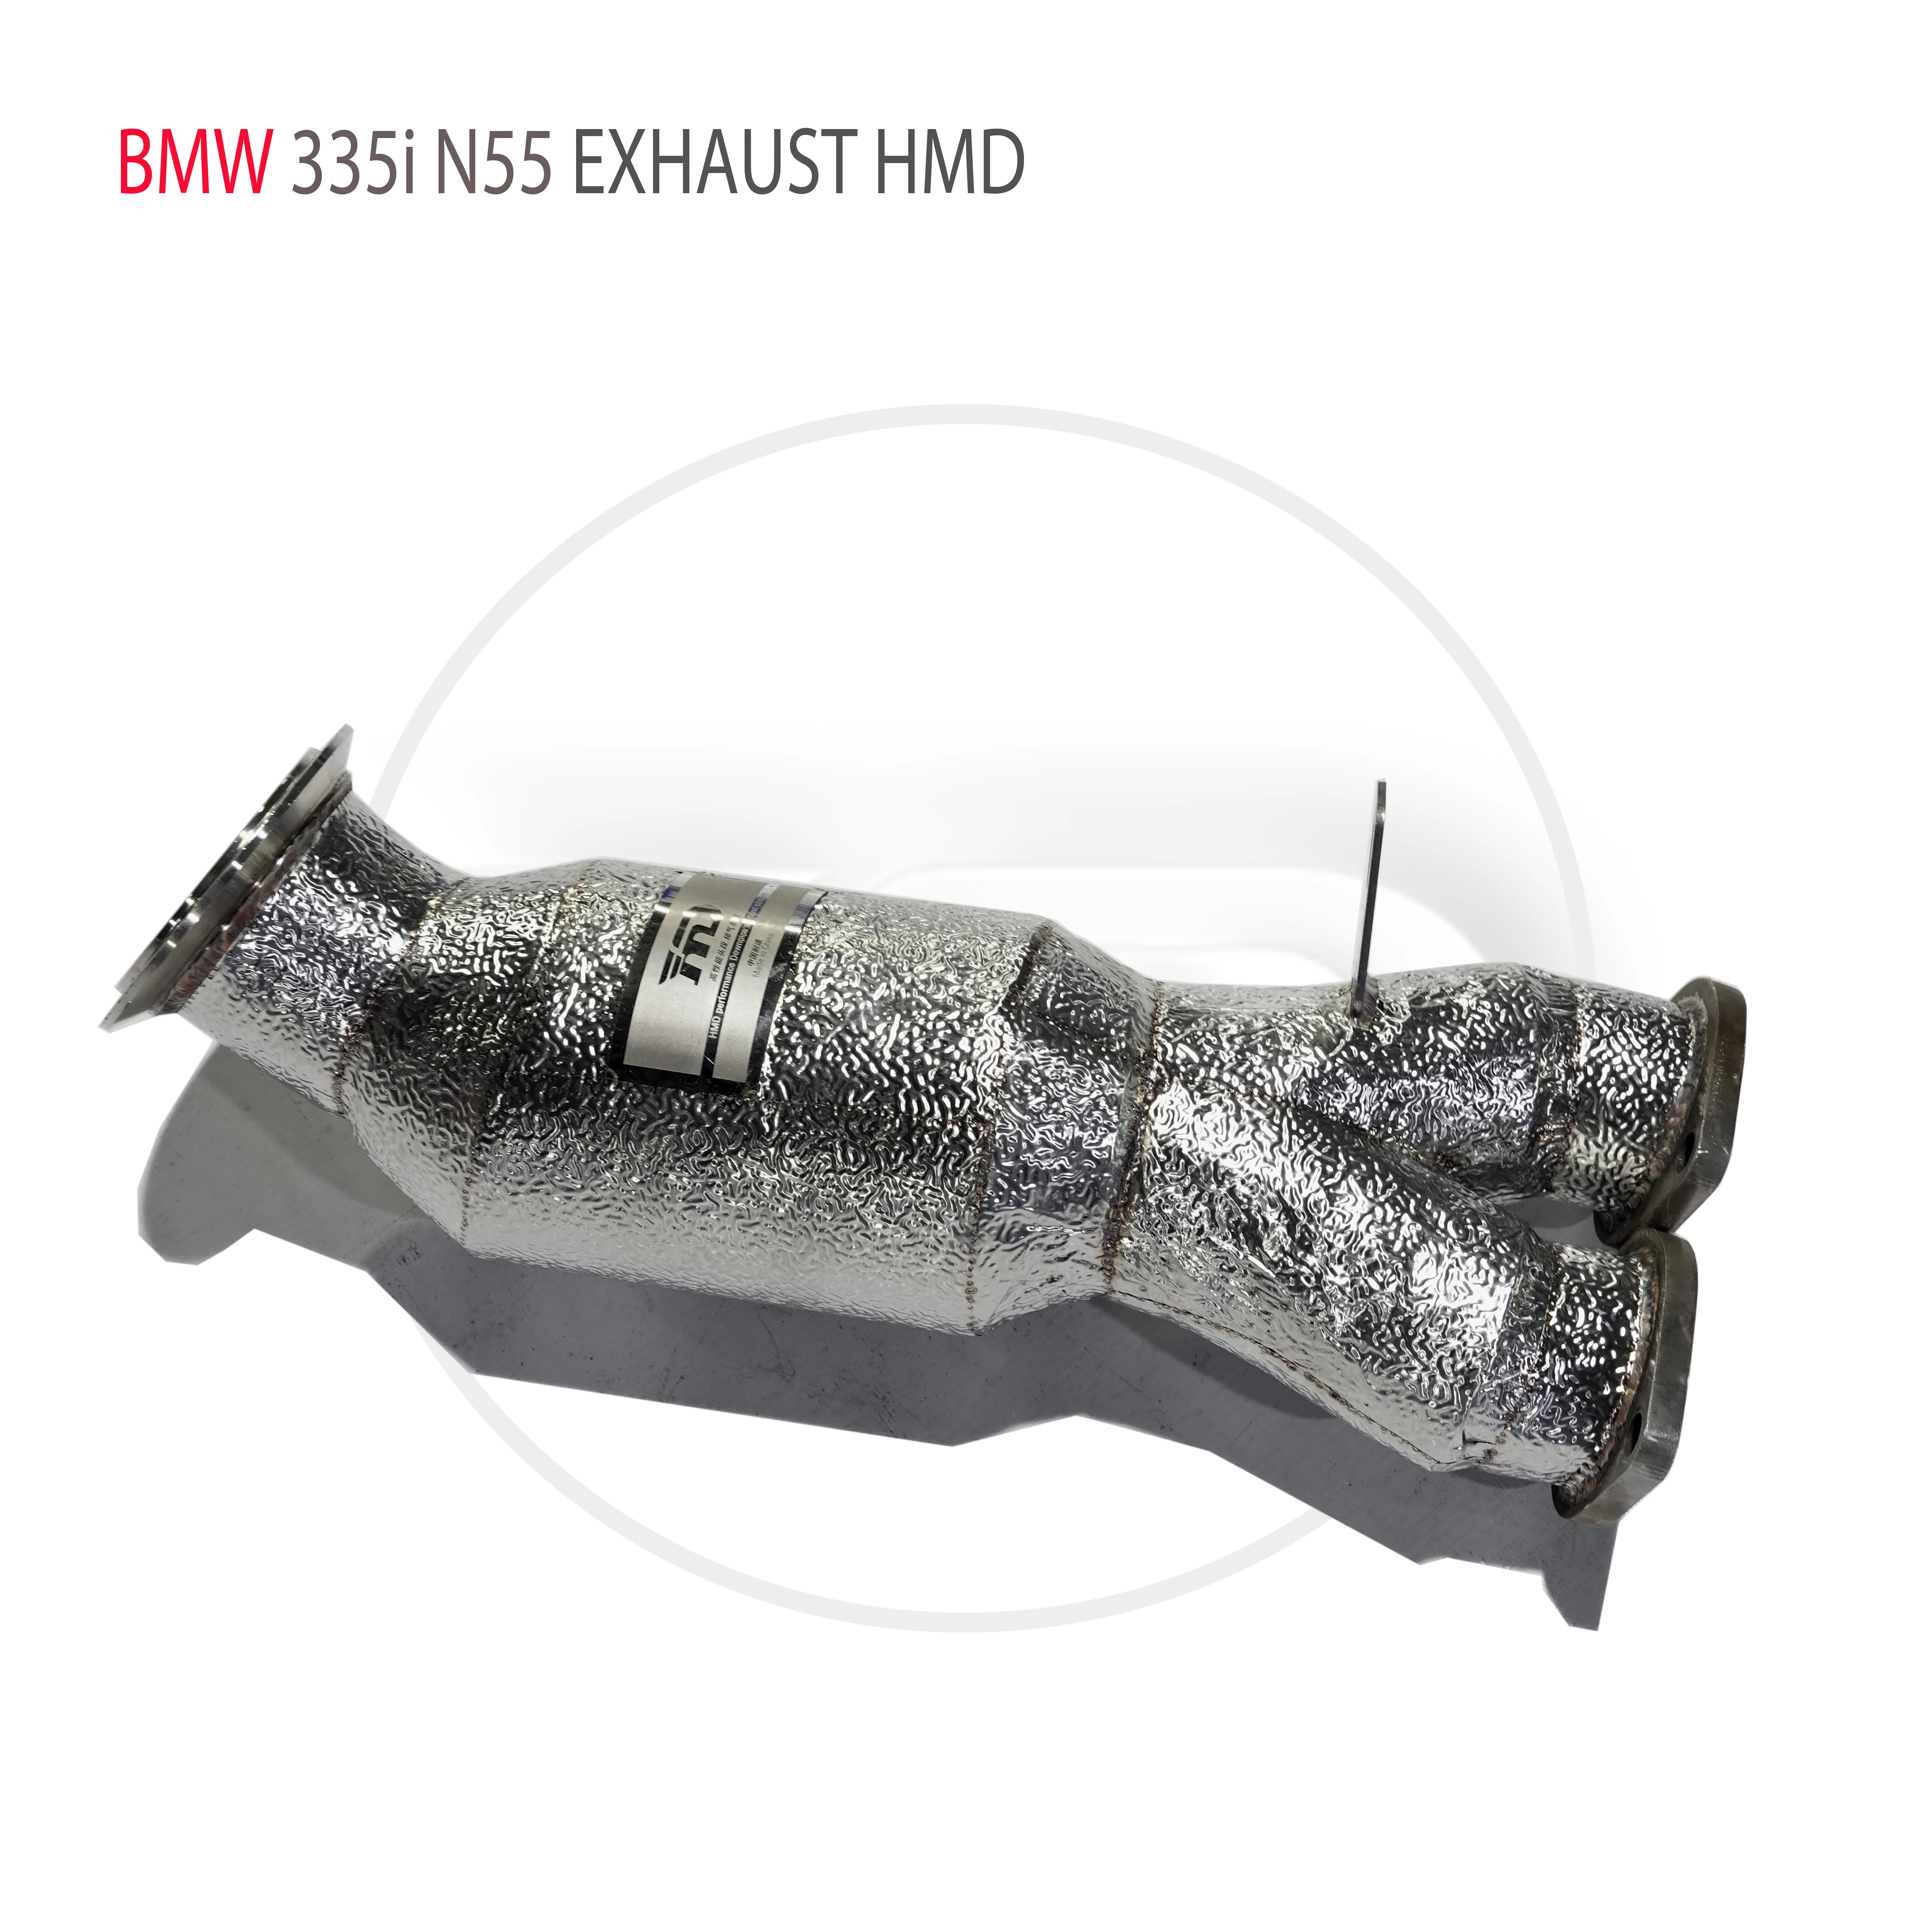 

HMD Exhaust Assembly High Flow Performance Downpipe for BMW 335i N55 Engine 3.0T Car Accessories Catalytic Converter